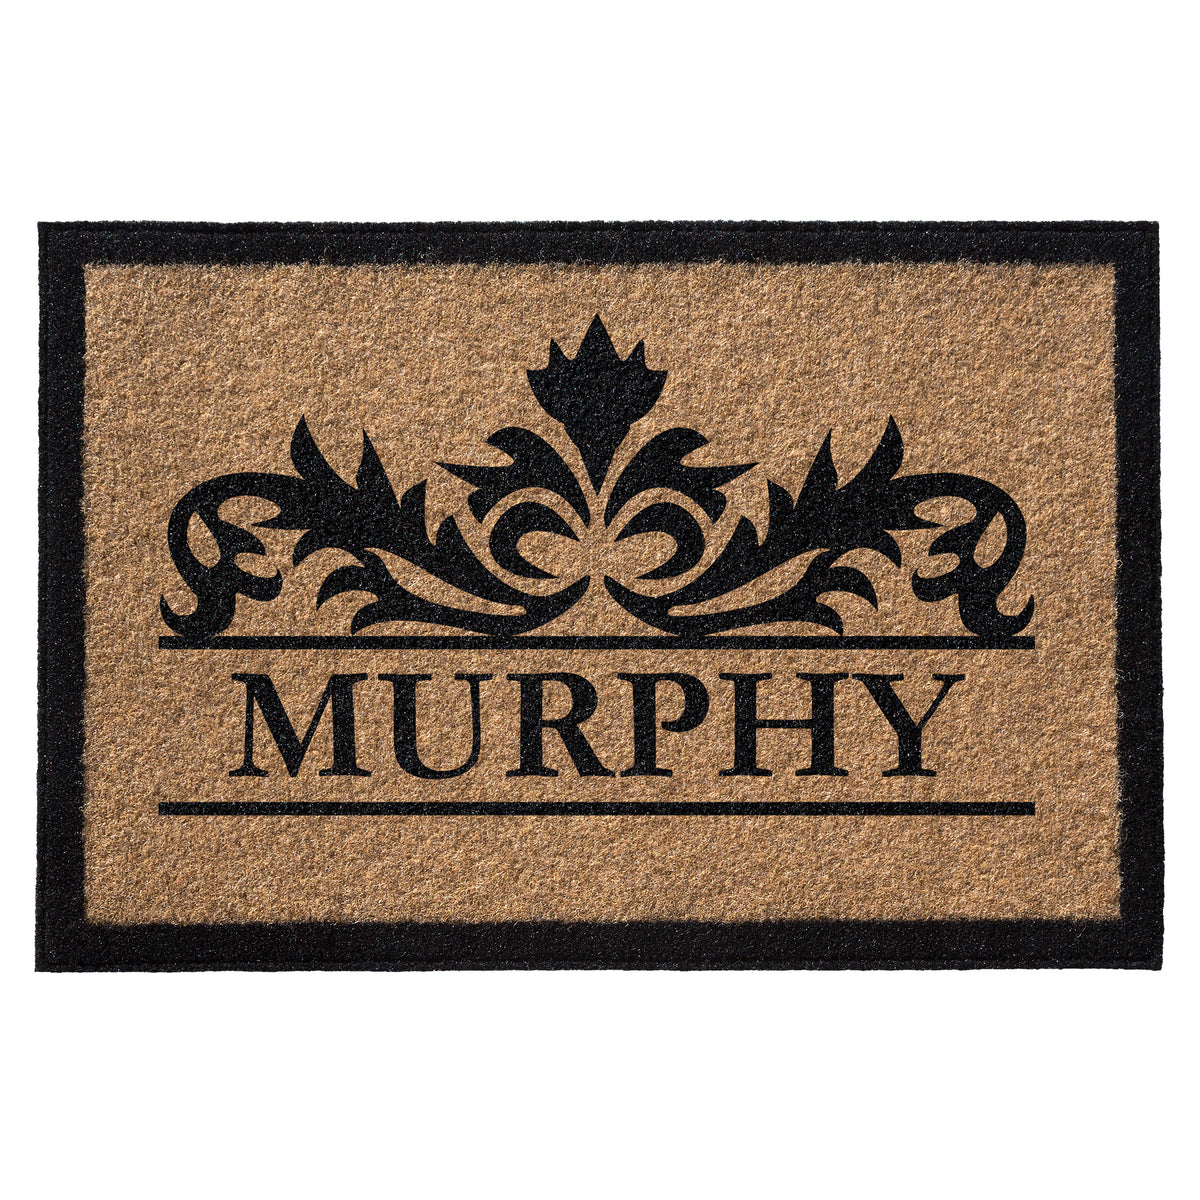 Infinity Custom Mats™ All-Weather Personalized Door Mat - STYLE: MURPHY COLOR:TAN - rugsthatfit.com